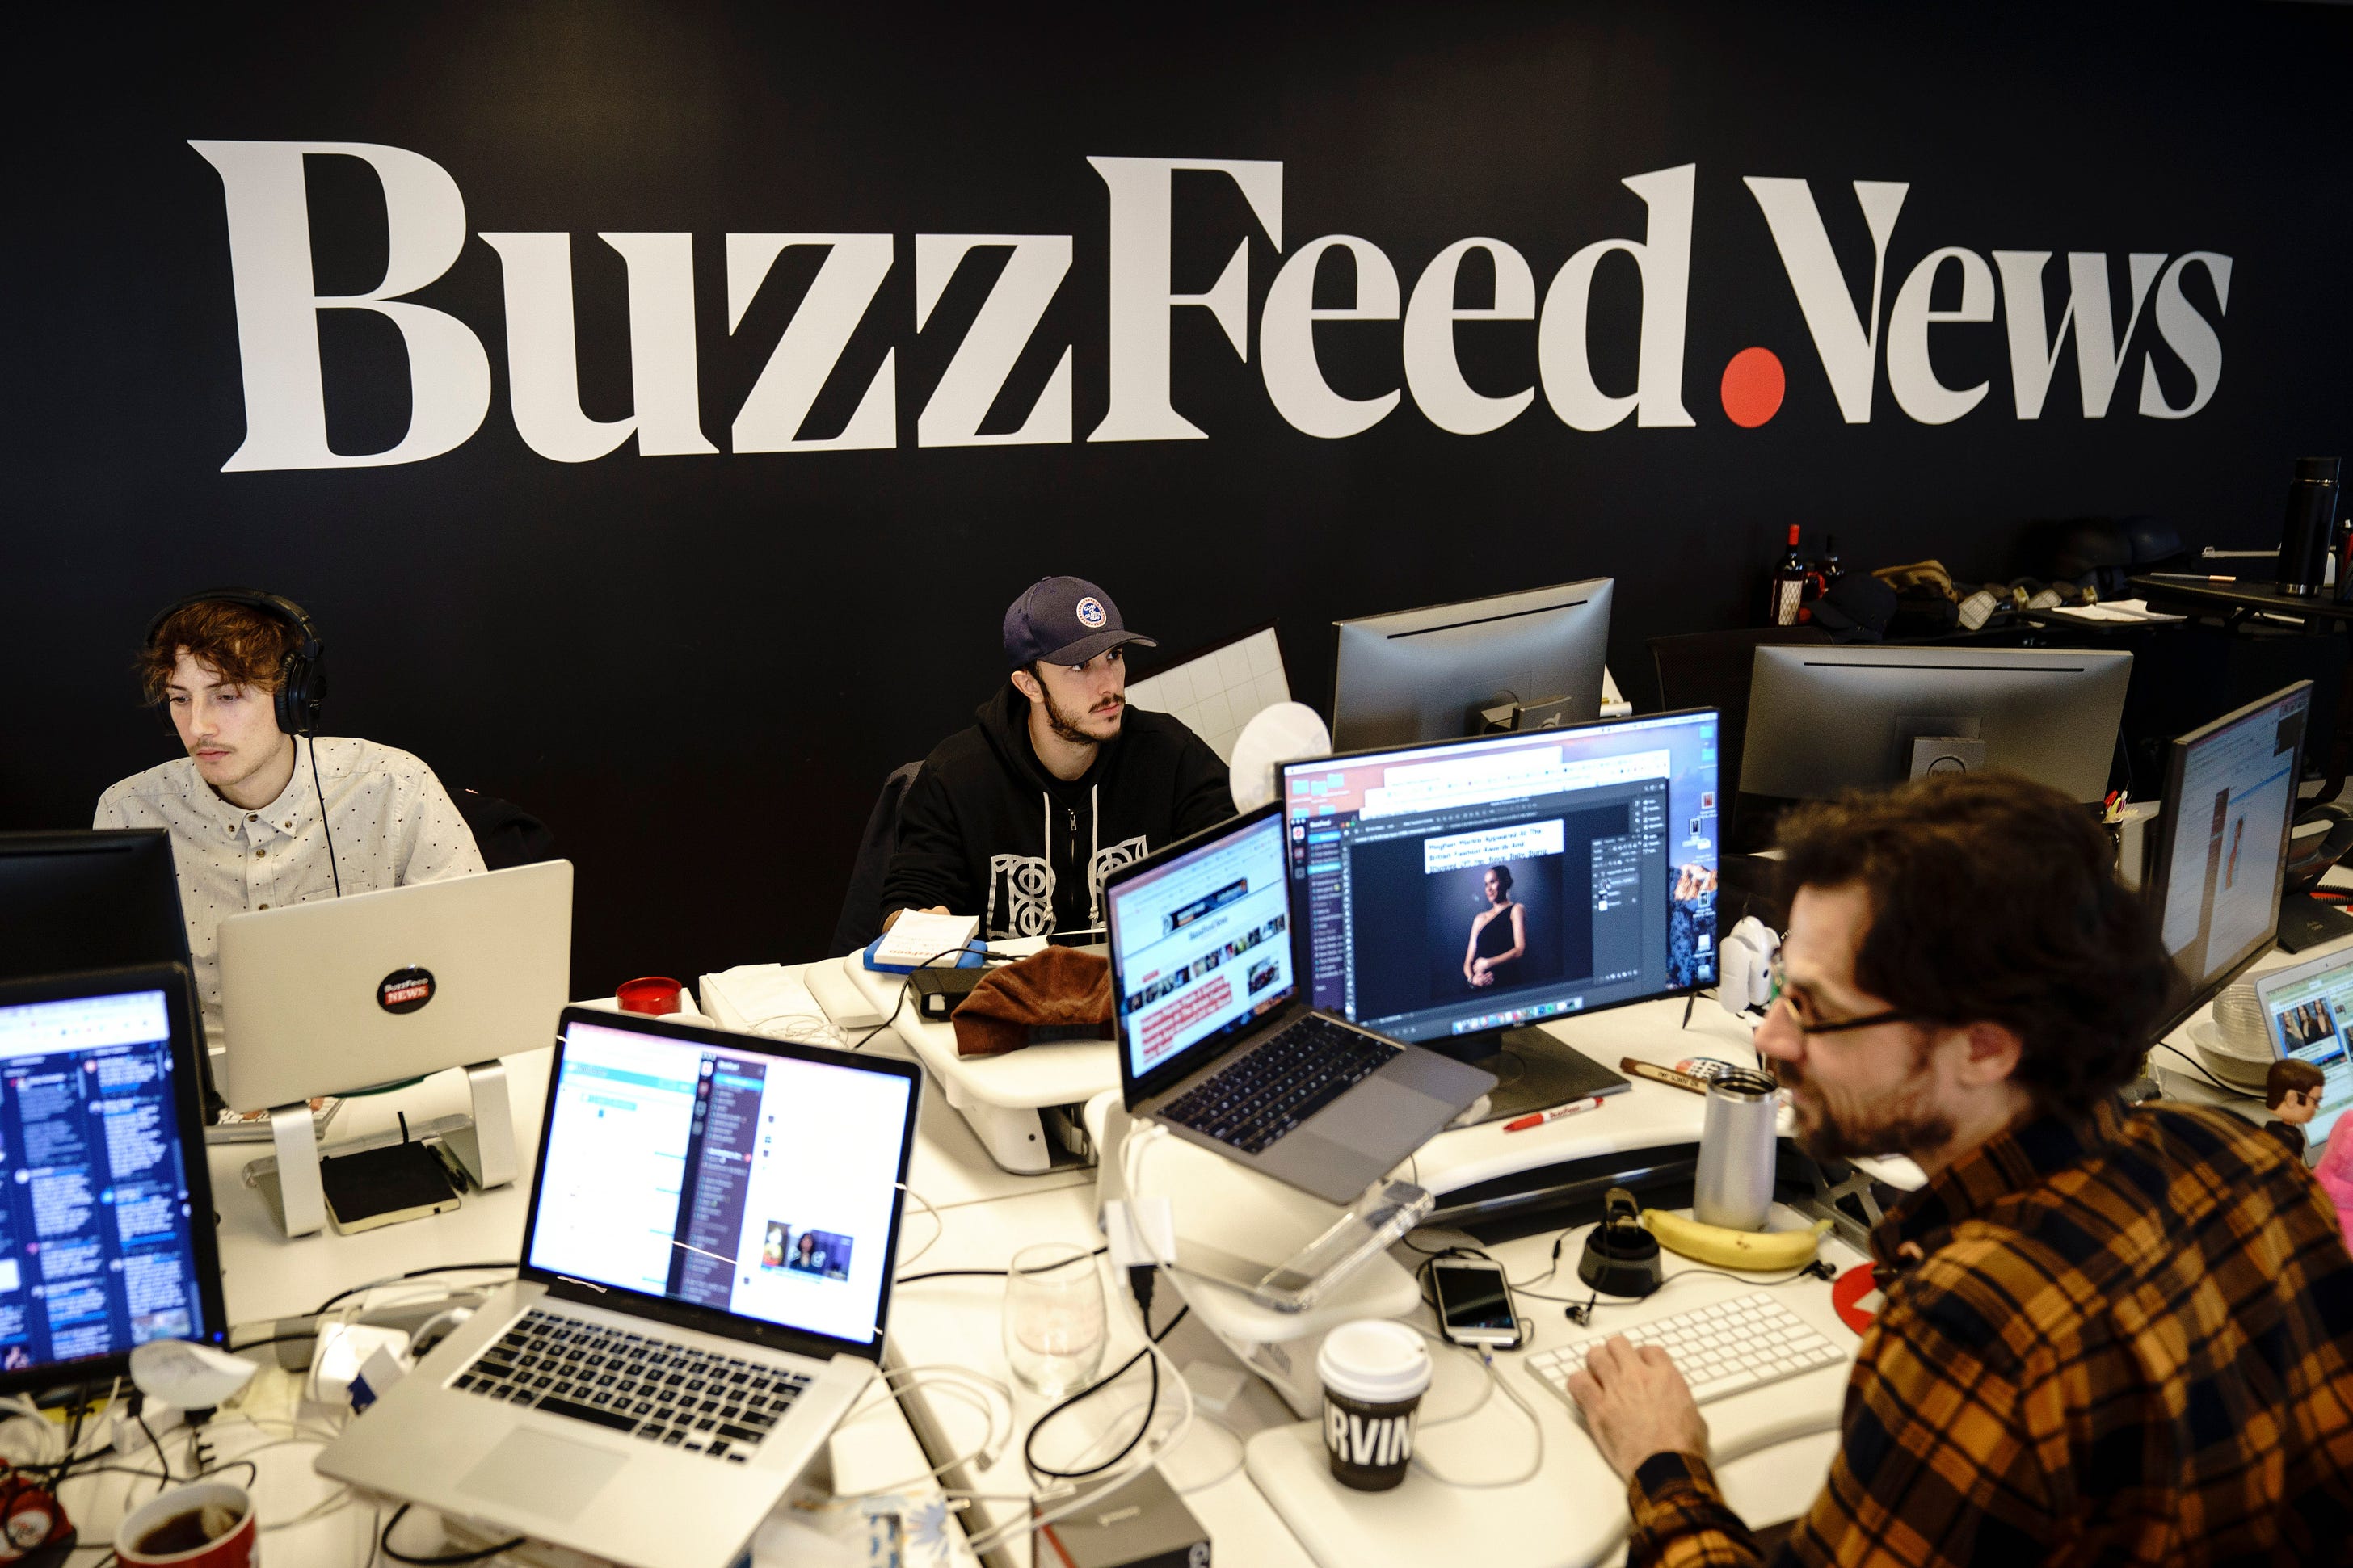 BuzzFeed News Is Shutting Down: “I'm Shocked and Sad but Not Totally  Surprised” | Vanity Fair